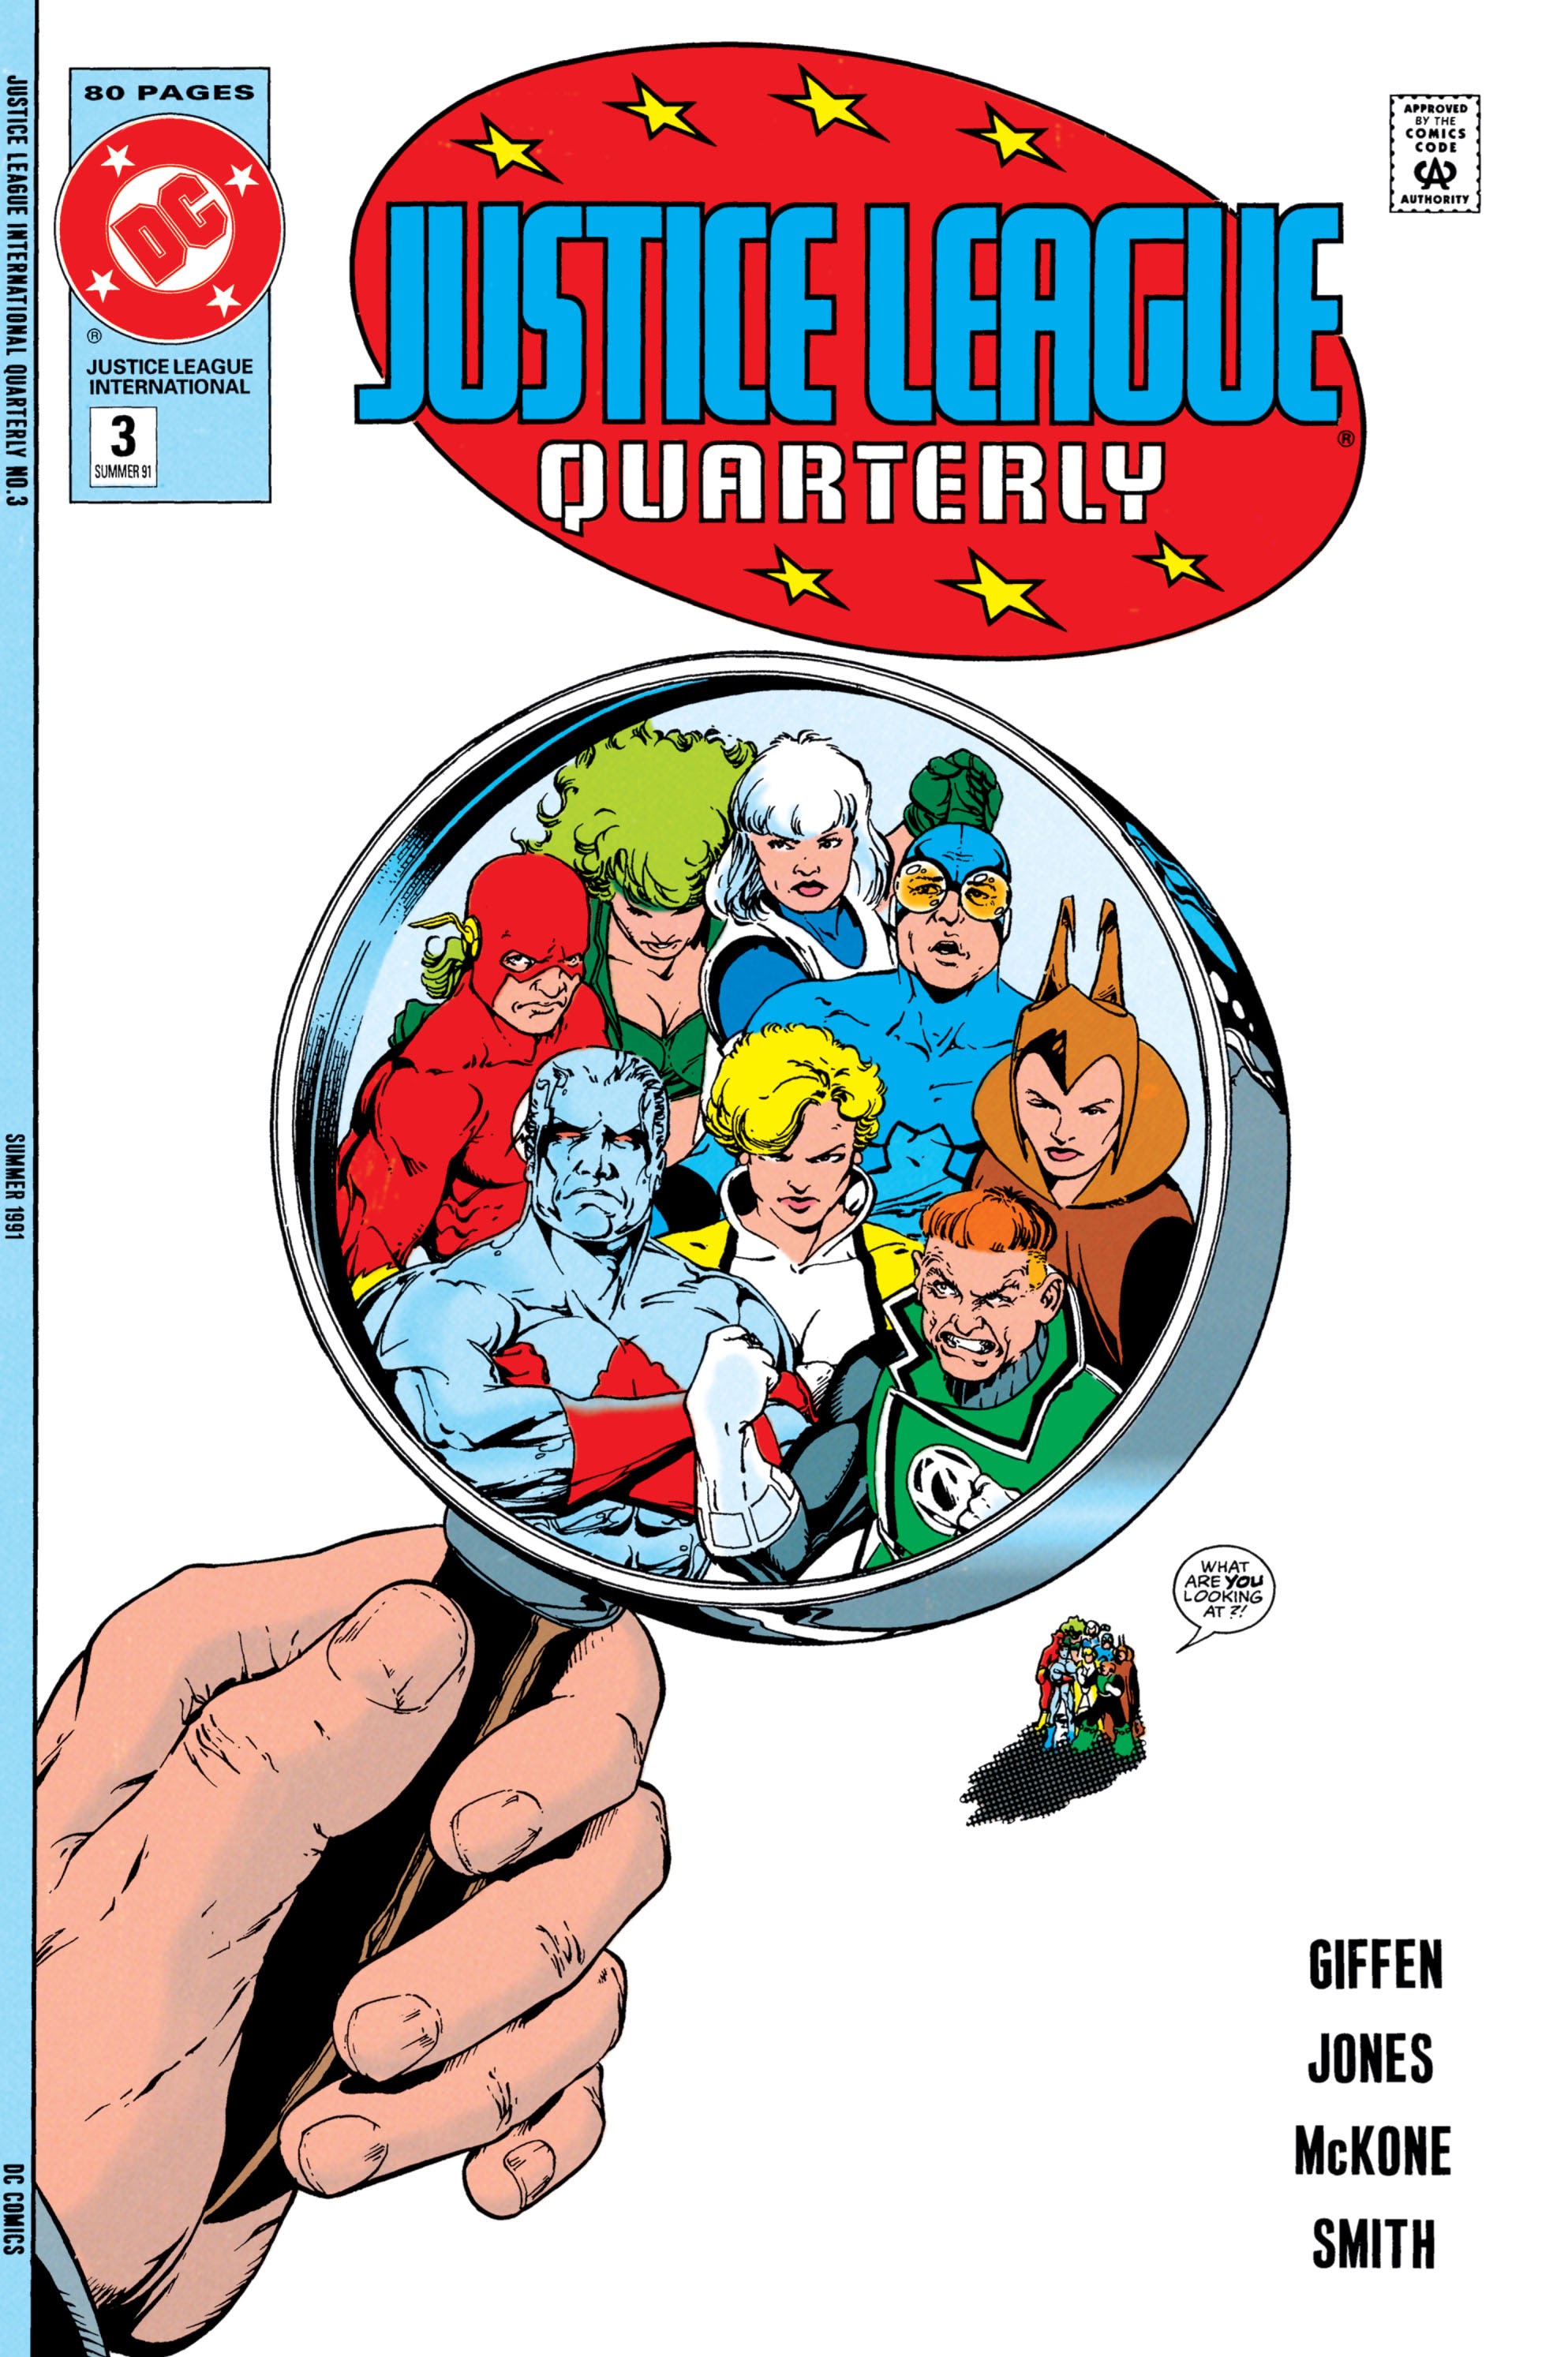 Read online Justice League Quarterly comic -  Issue #3 - 1